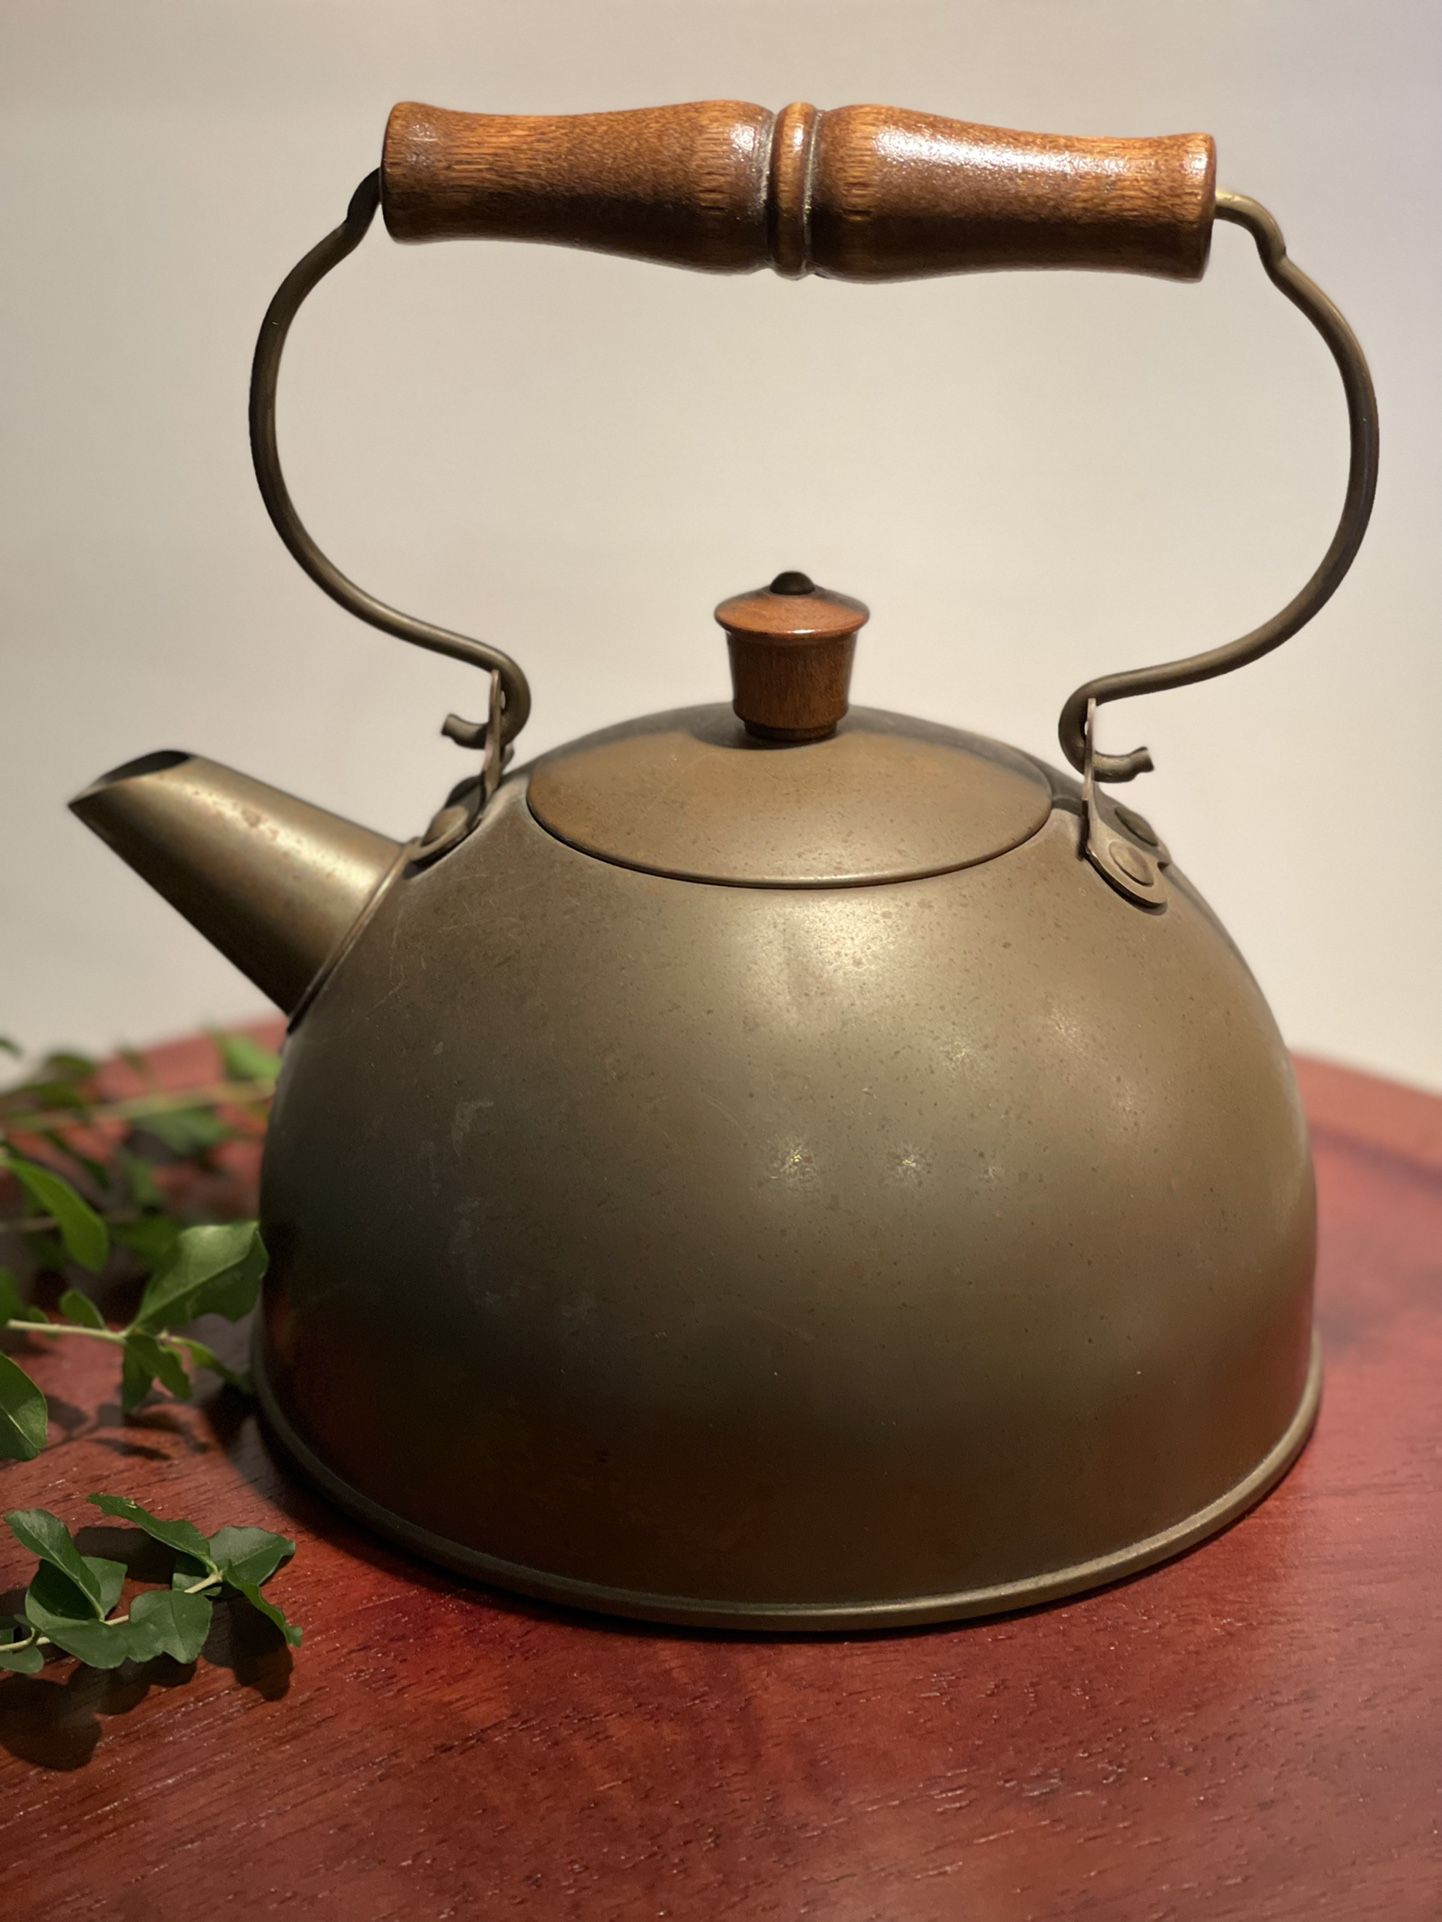 Vintage “Revere Ware” solid copper tea kettle! 10” high with handle up. Handle drops down left or right. No dents. Great as collectible or display. 